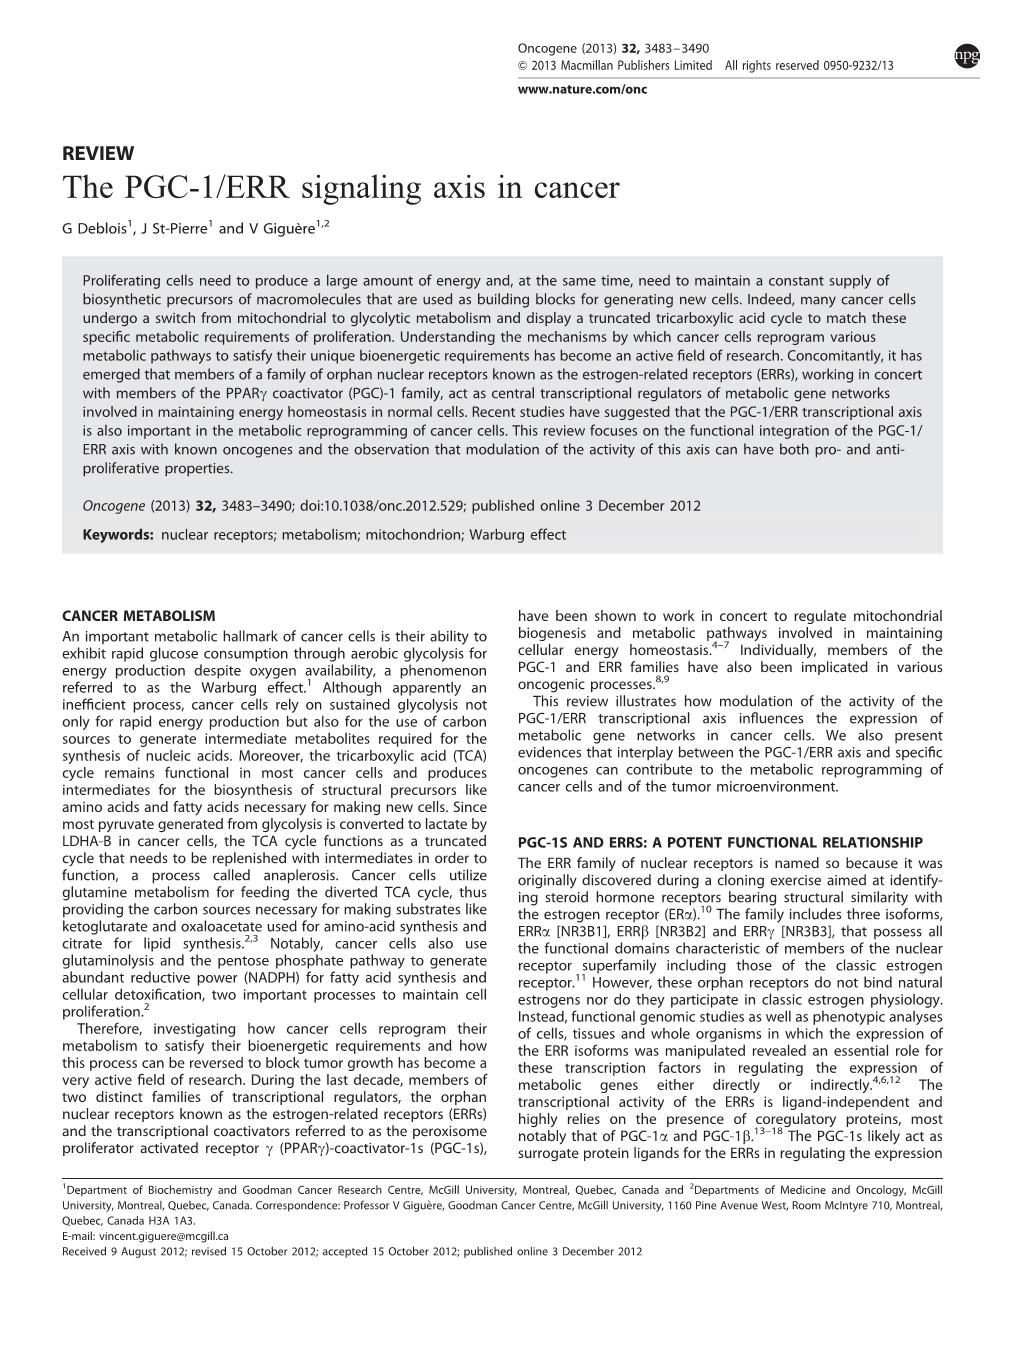 The PGC-1&Sol;ERR Signaling Axis in Cancer